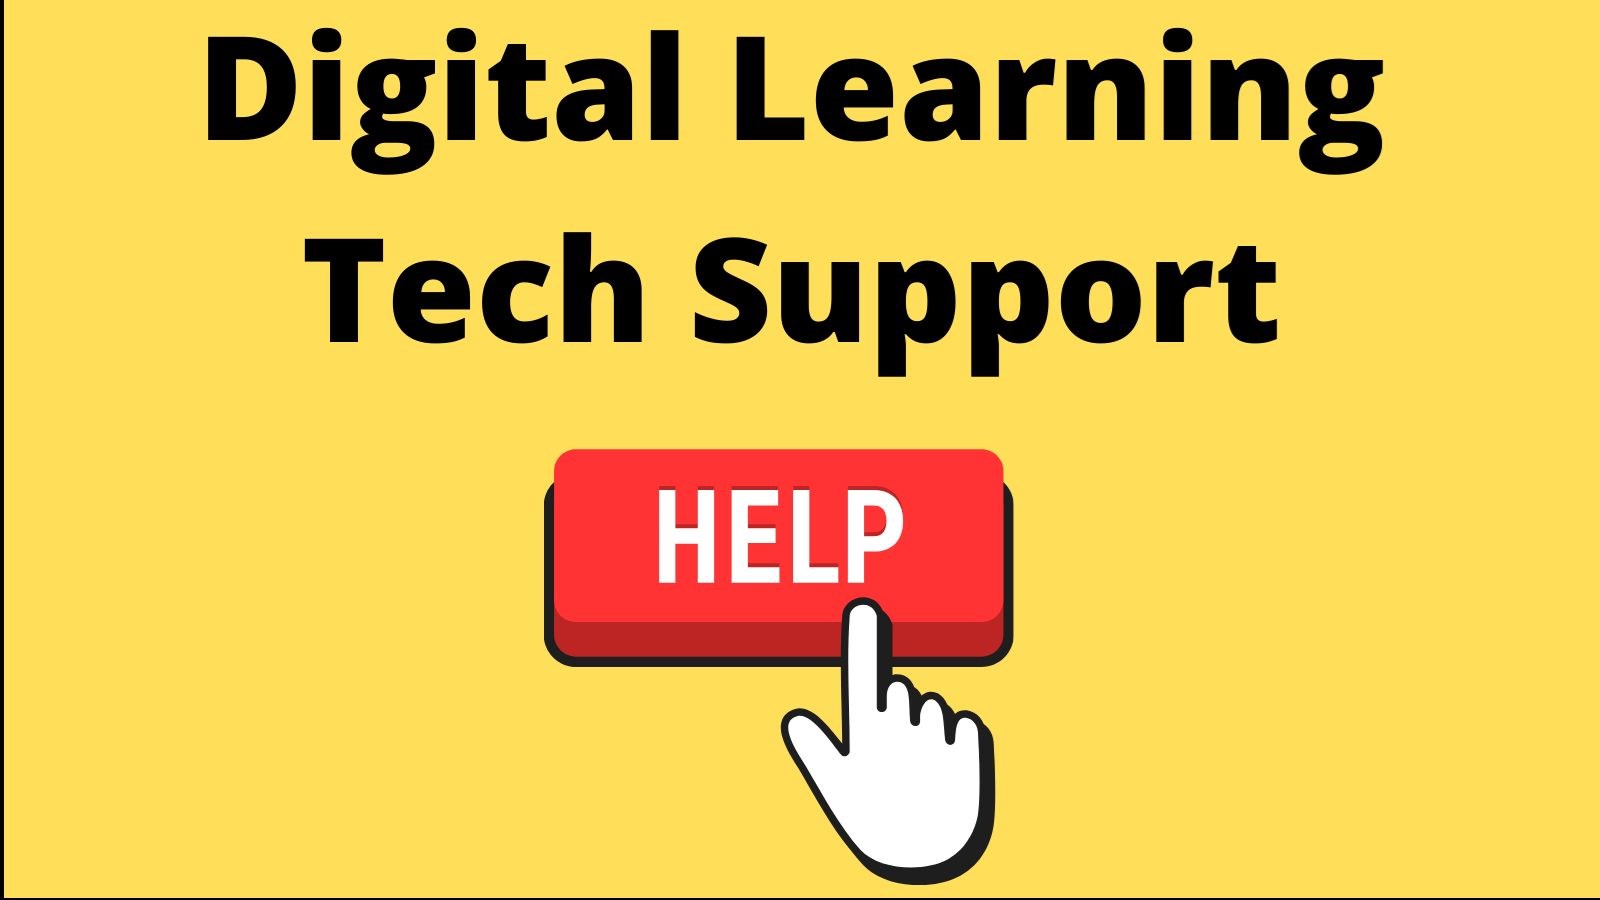 Digital Learning Tech Support